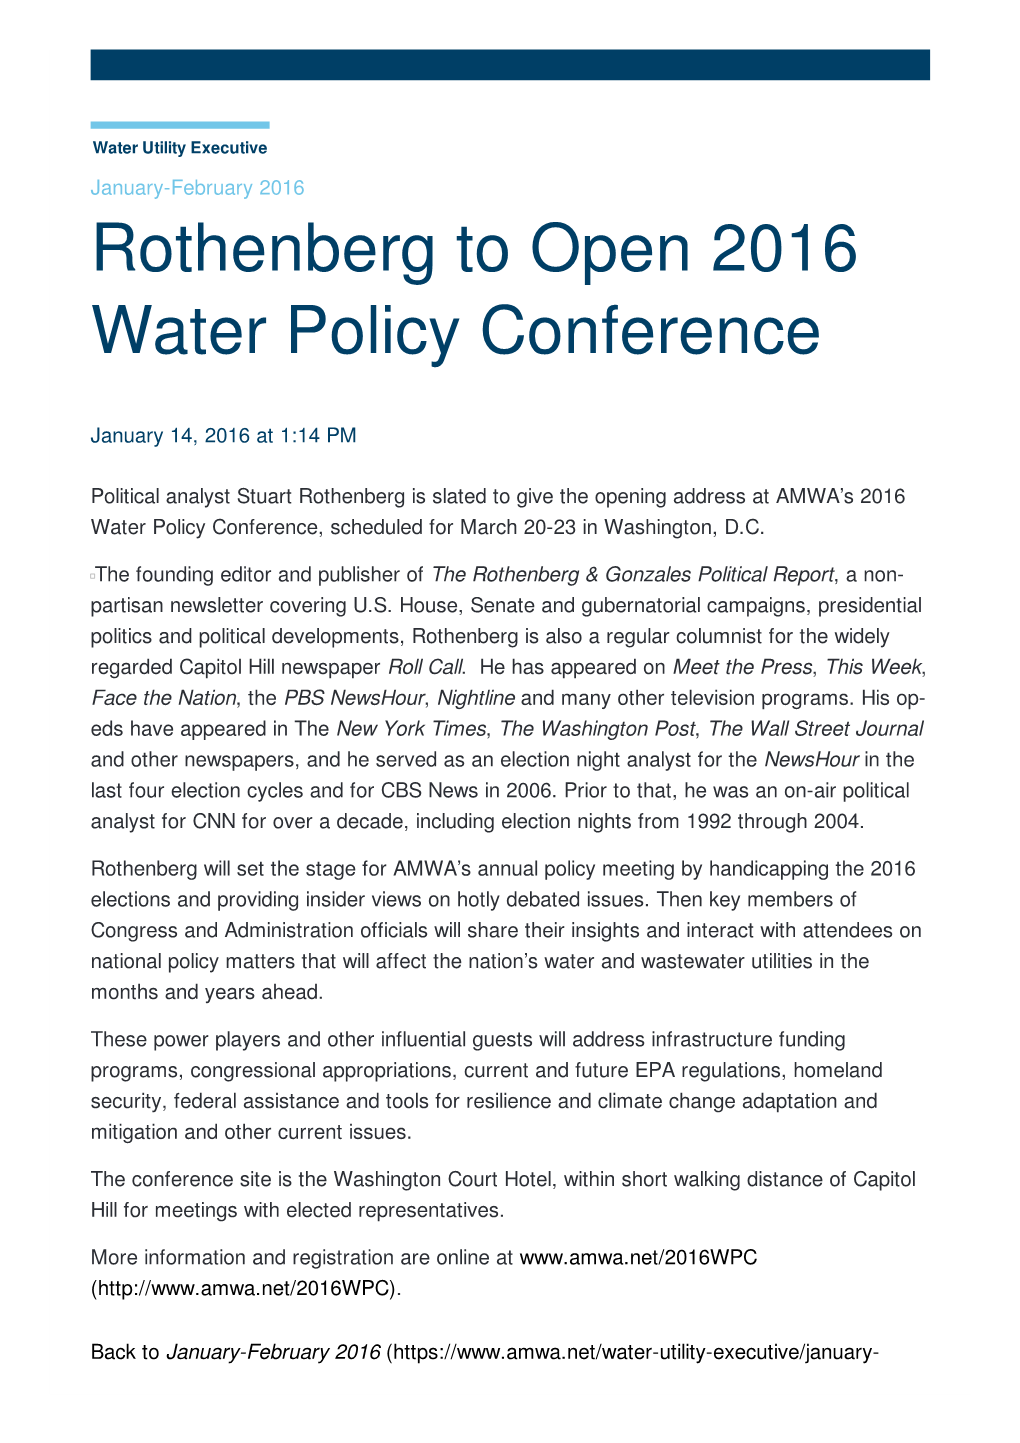 Rothenberg to Open 2016 Water Policy Conference